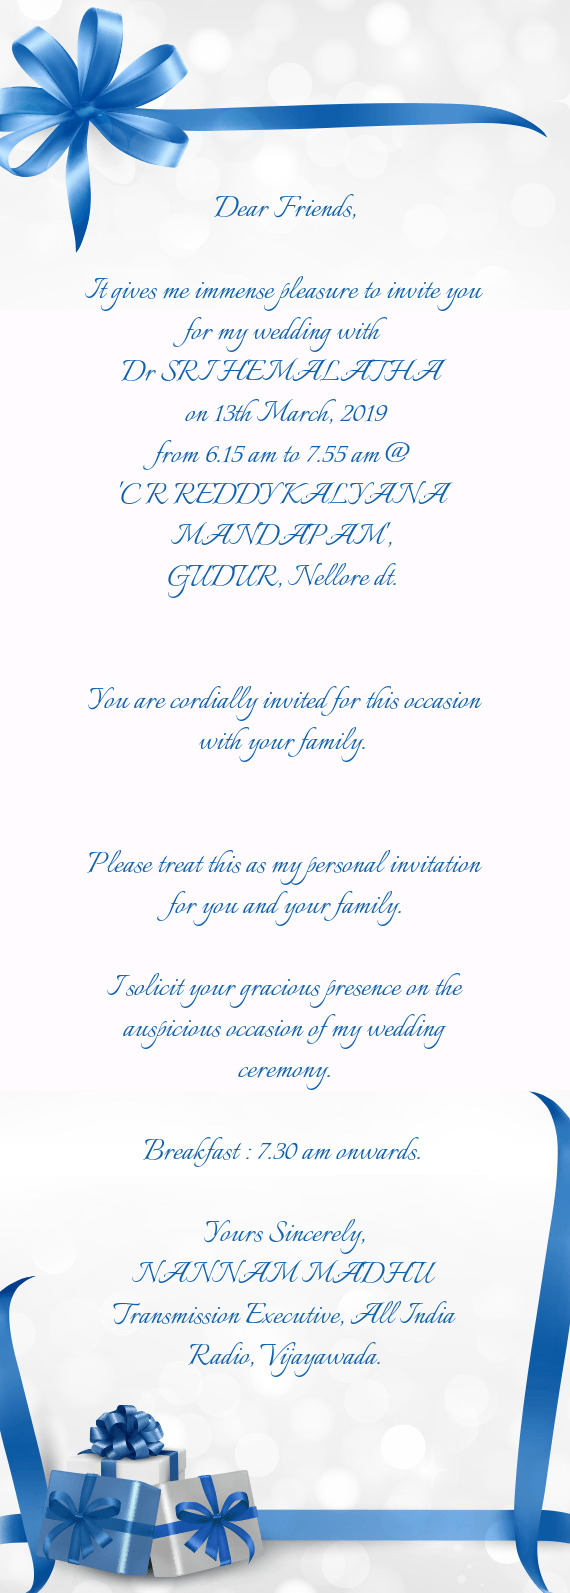 It gives me immense pleasure to invite you for my wedding with